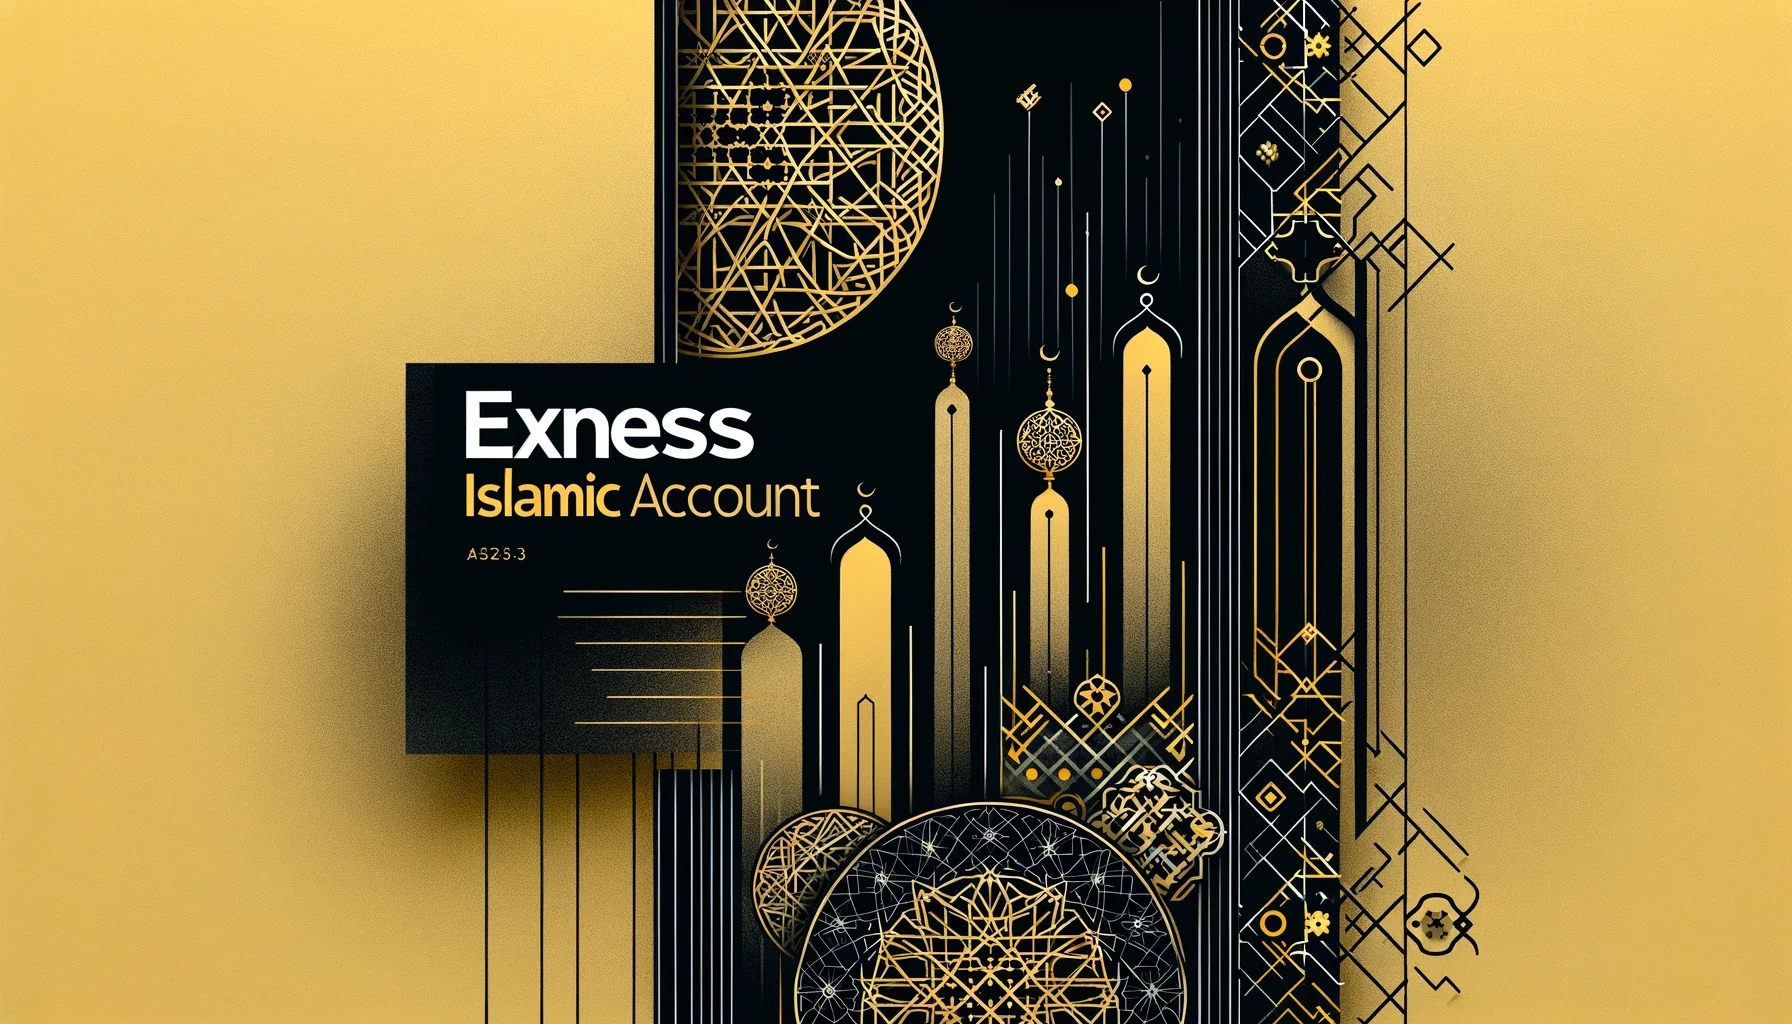 Islamic account in Exness